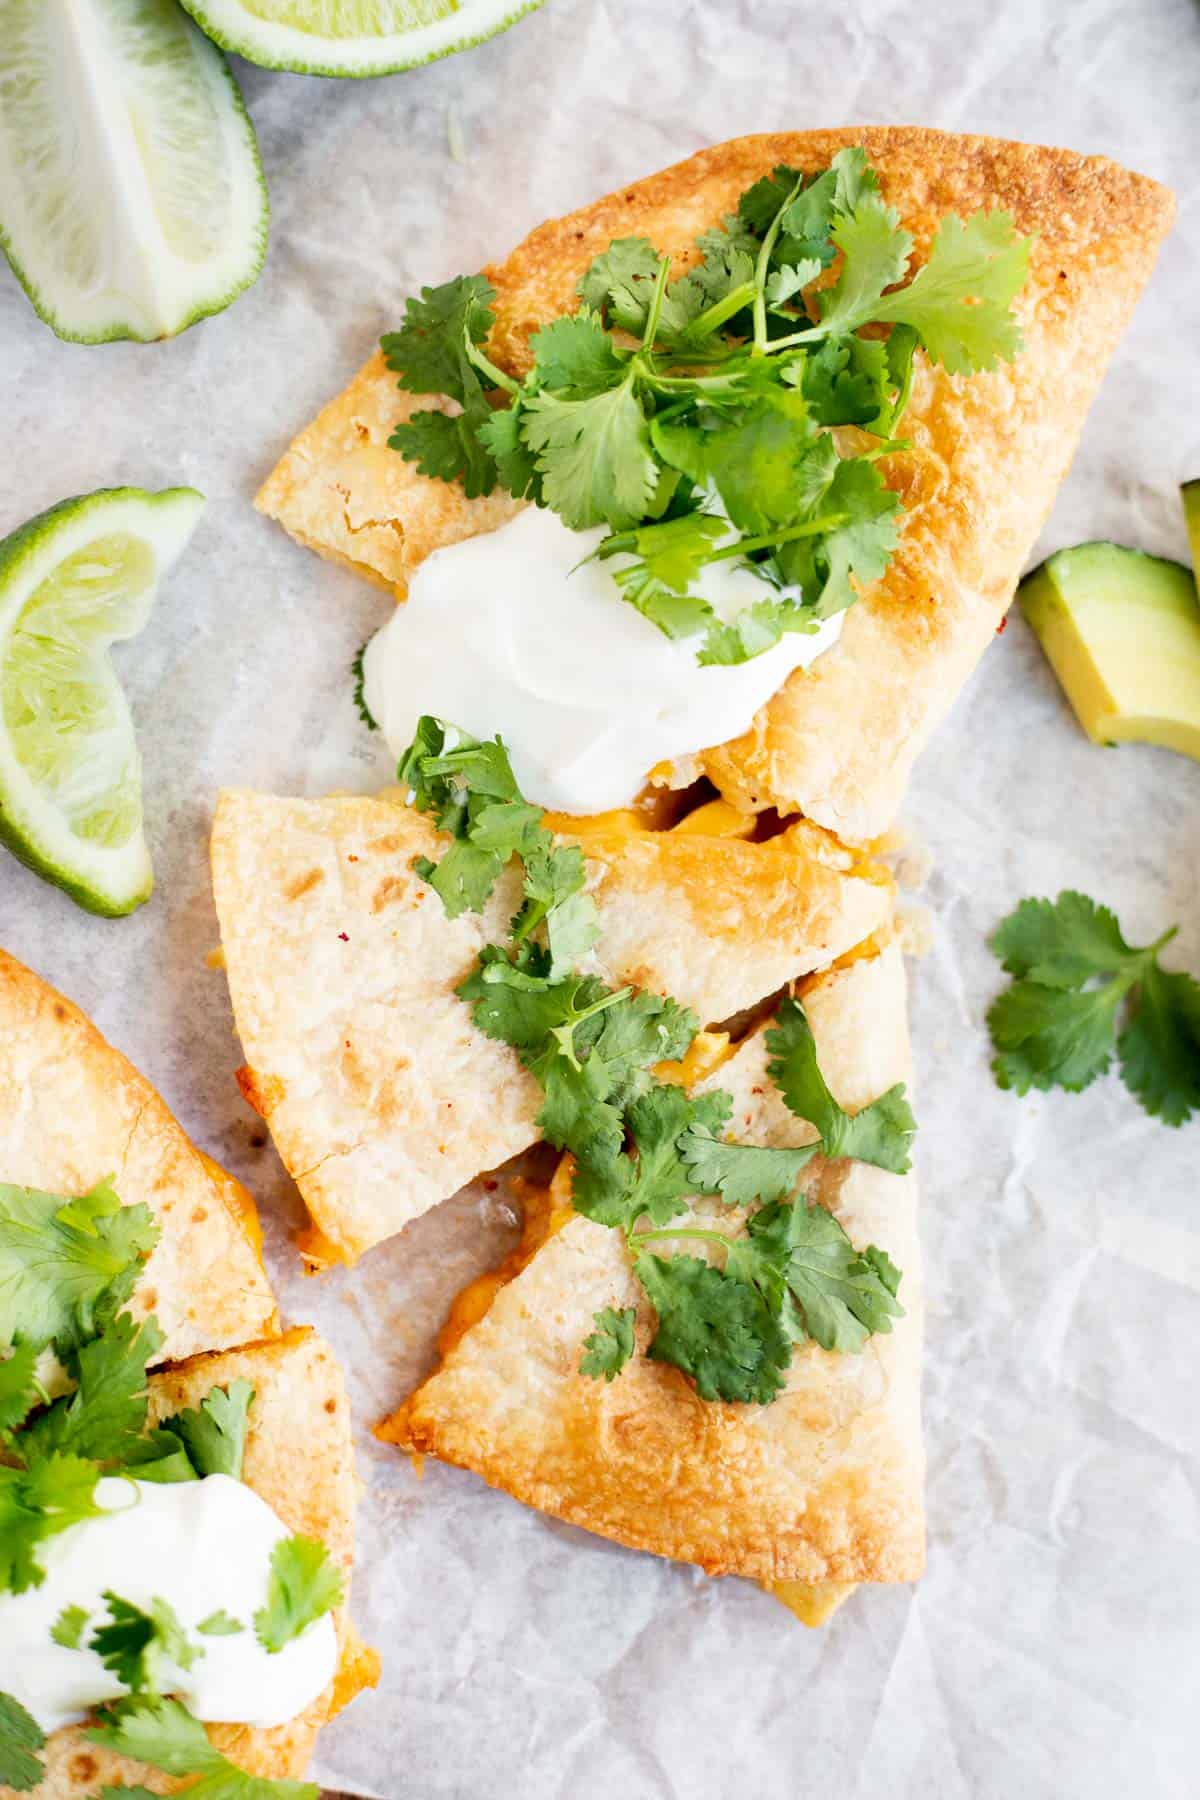 cheese quesadilla cut into triangles on parchment paper and topped with cilantro and sour cream.